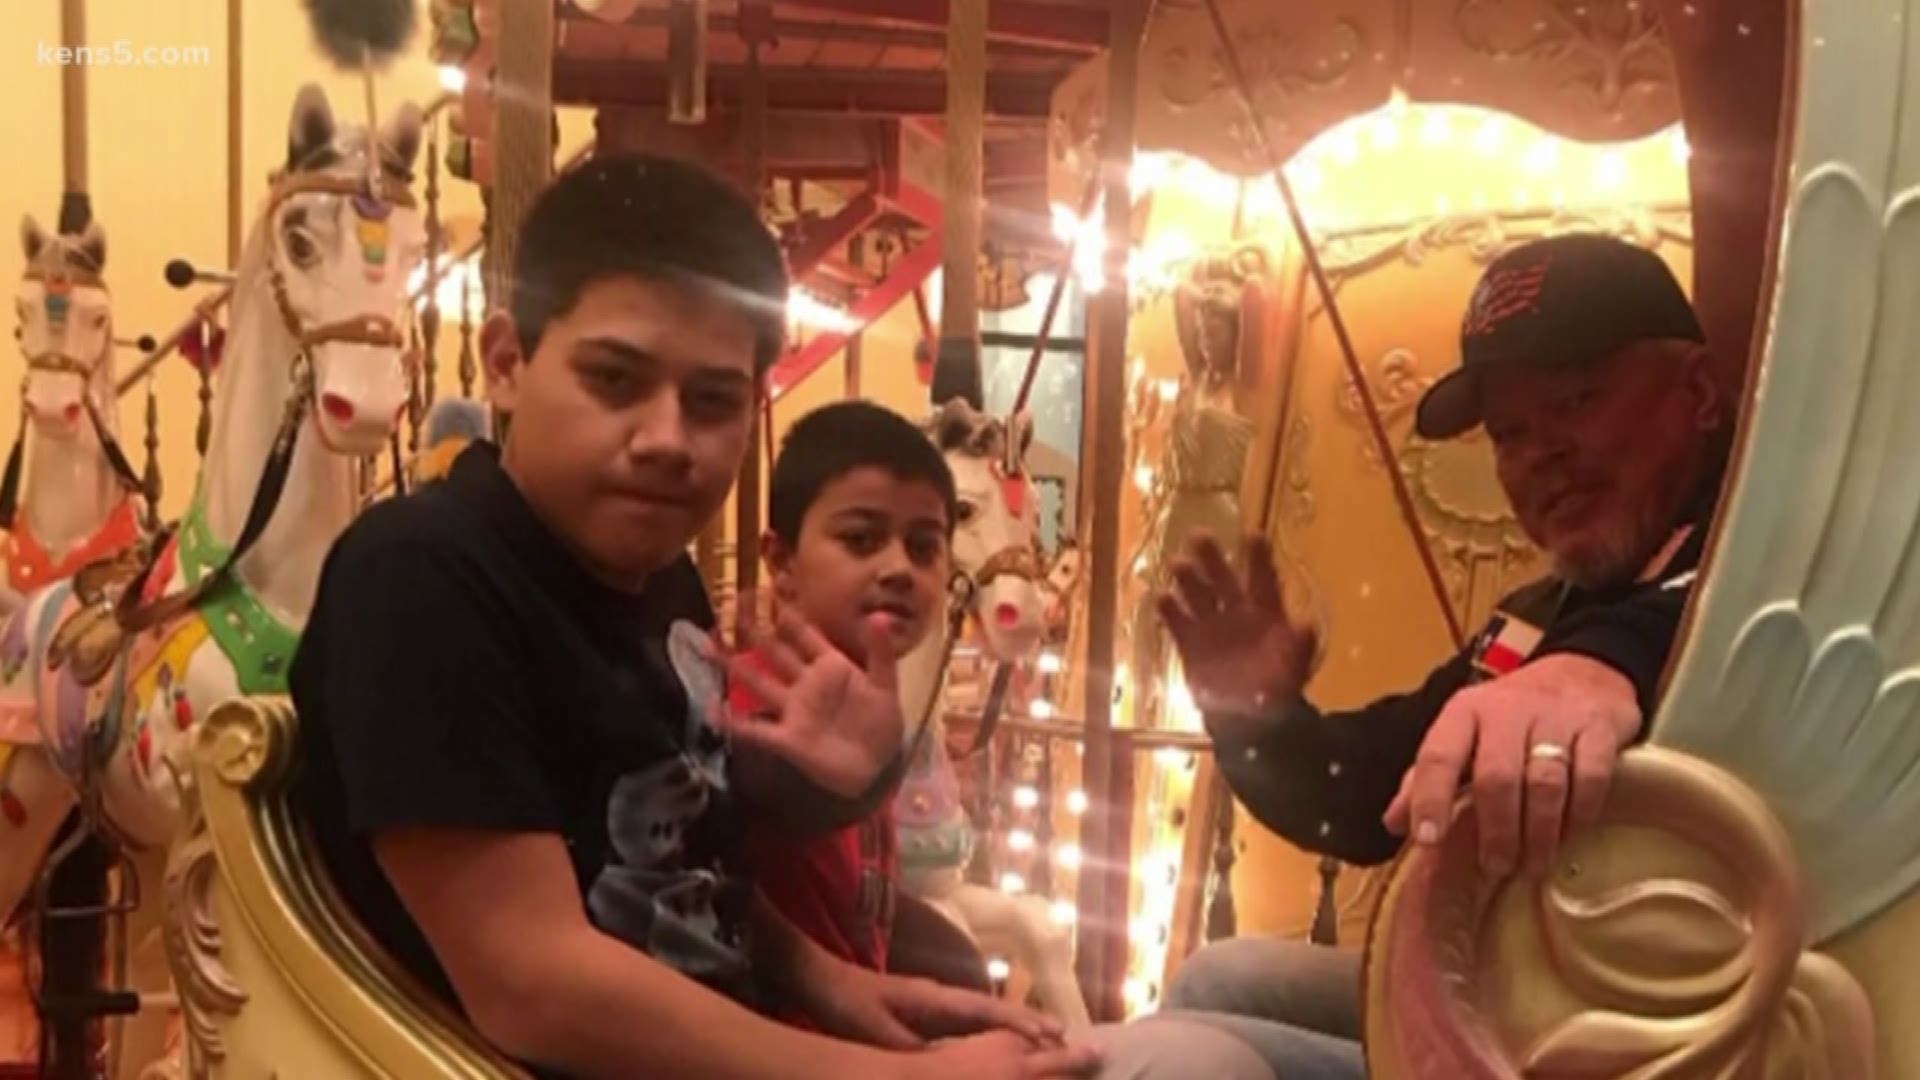 A San Antonio mother and her two sons are missing and police are asking for your help to find them.